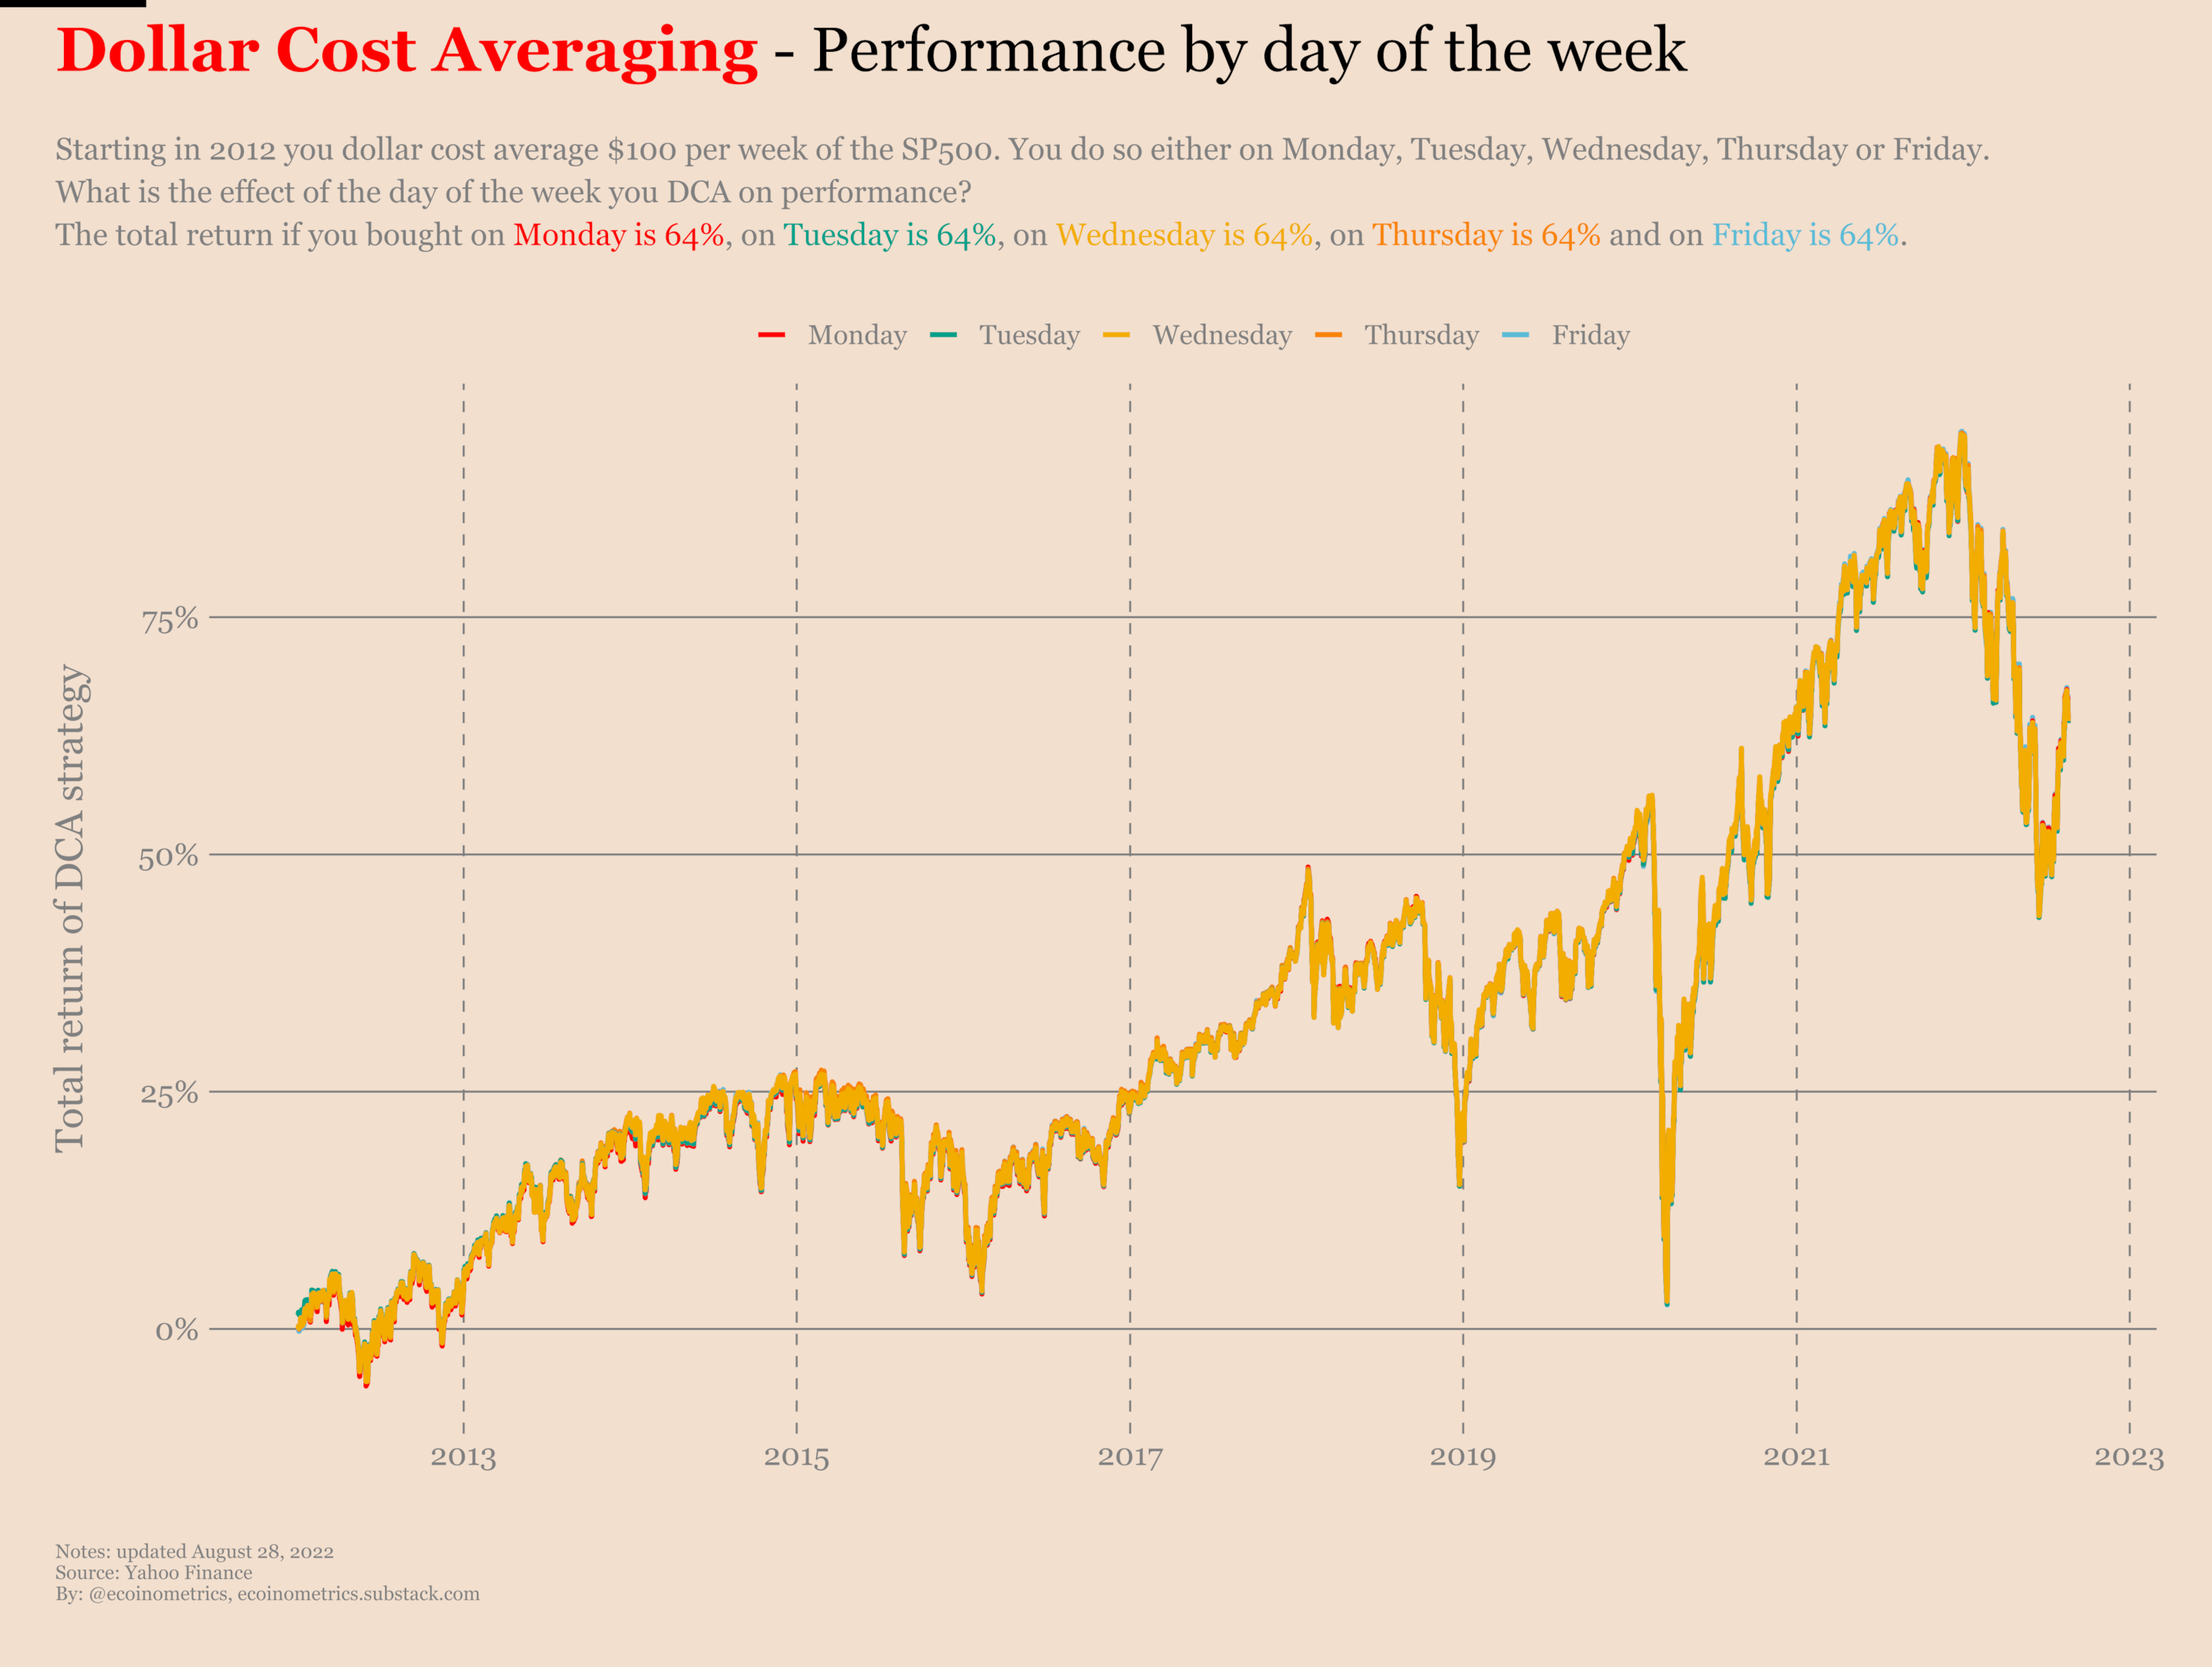 If you dollar cost average the SP500 long enough, it doesn't matter which day of the week you choose.